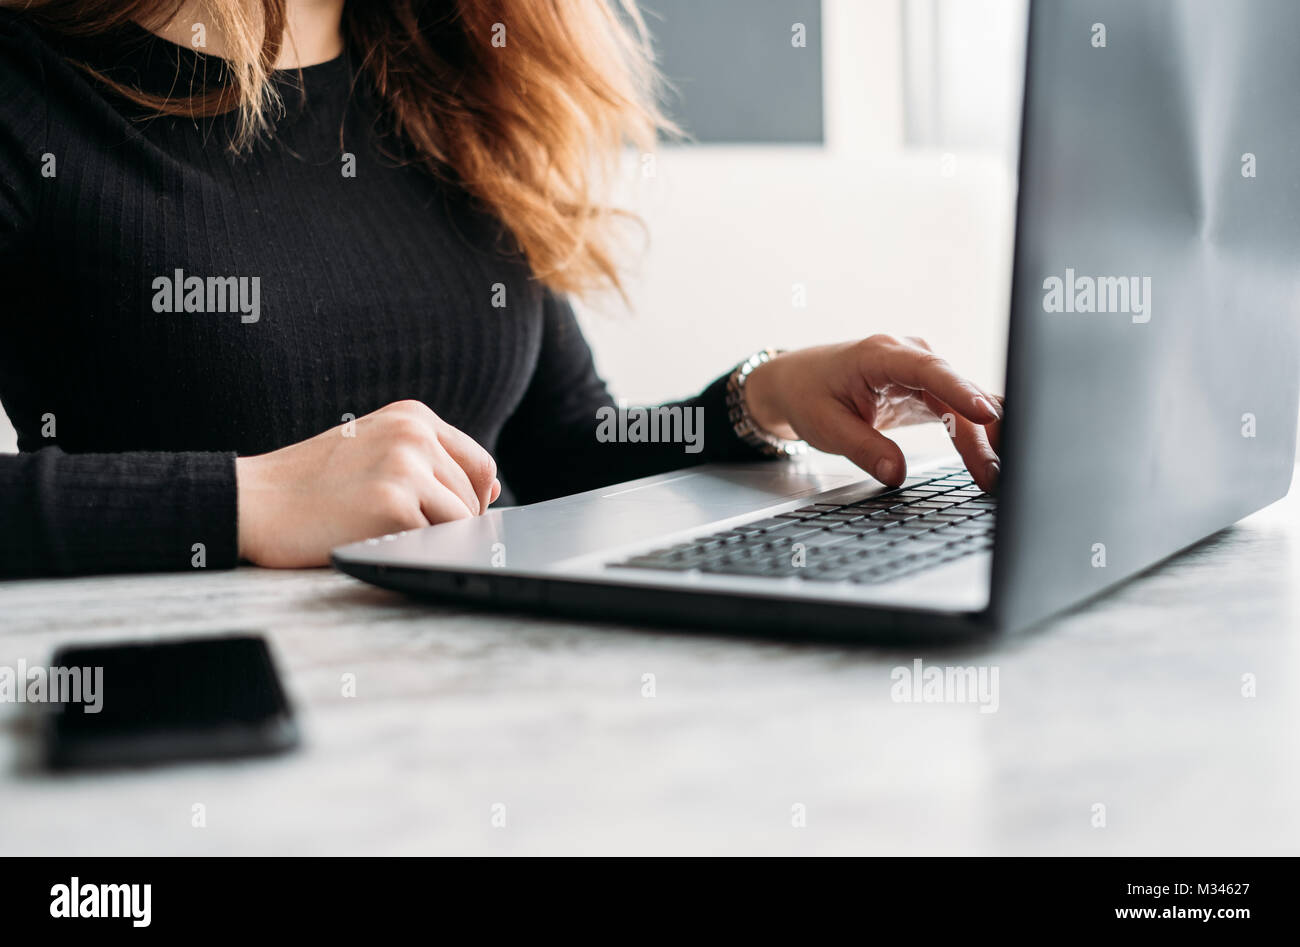 Woman sitting at a table using her laptop Stock Photo